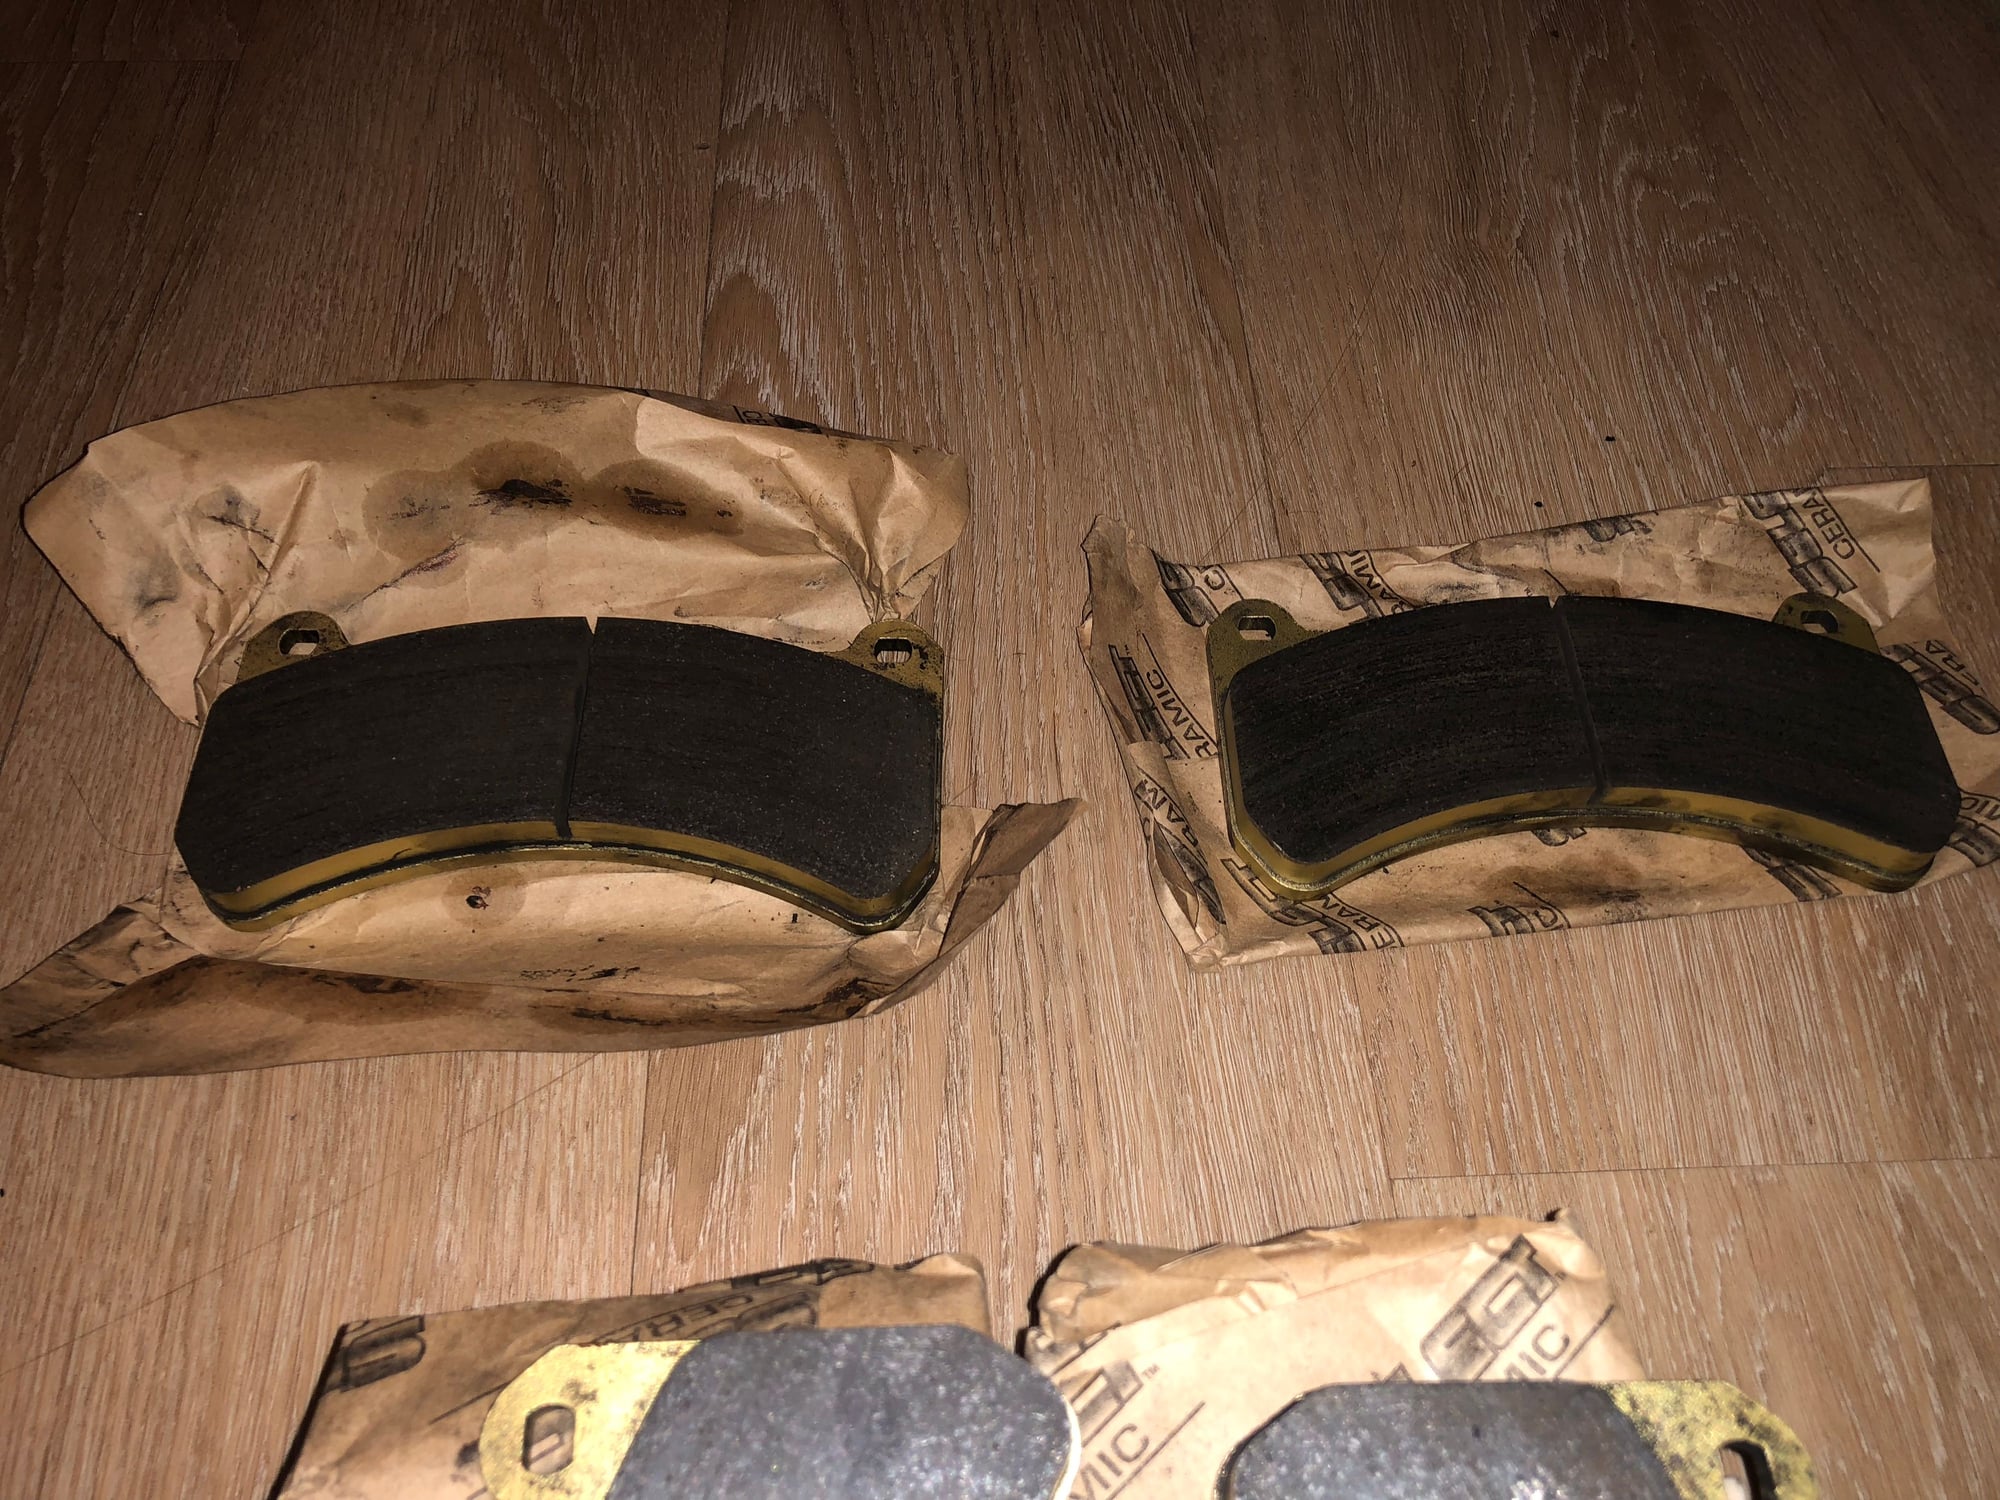 Brakes - Winmax W2 like new less than 300 miles - Used - 2008 to 2014 Lexus IS F - Germantown, MD 20874, United States